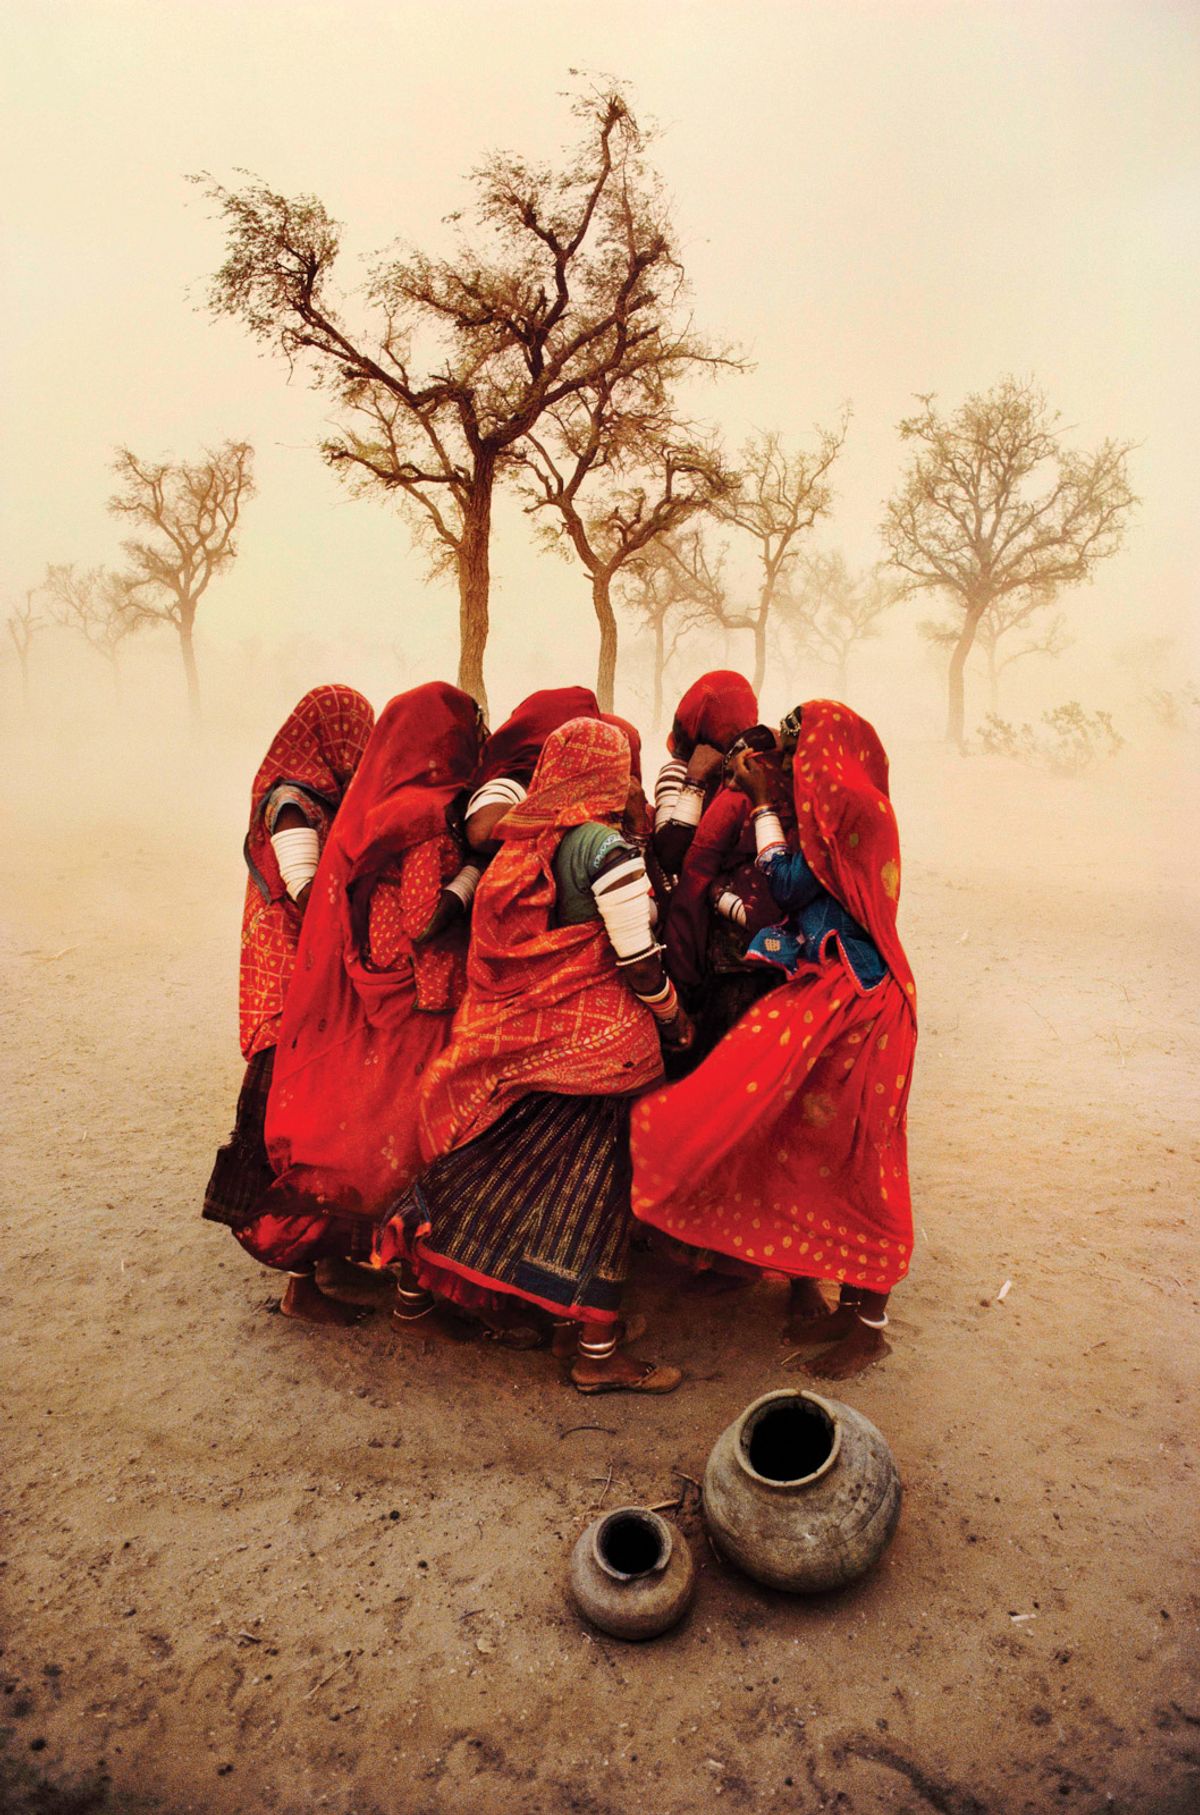 Steve McCurry's Dust Storm, Rajasthan, India (1983) Courtesy of the artist